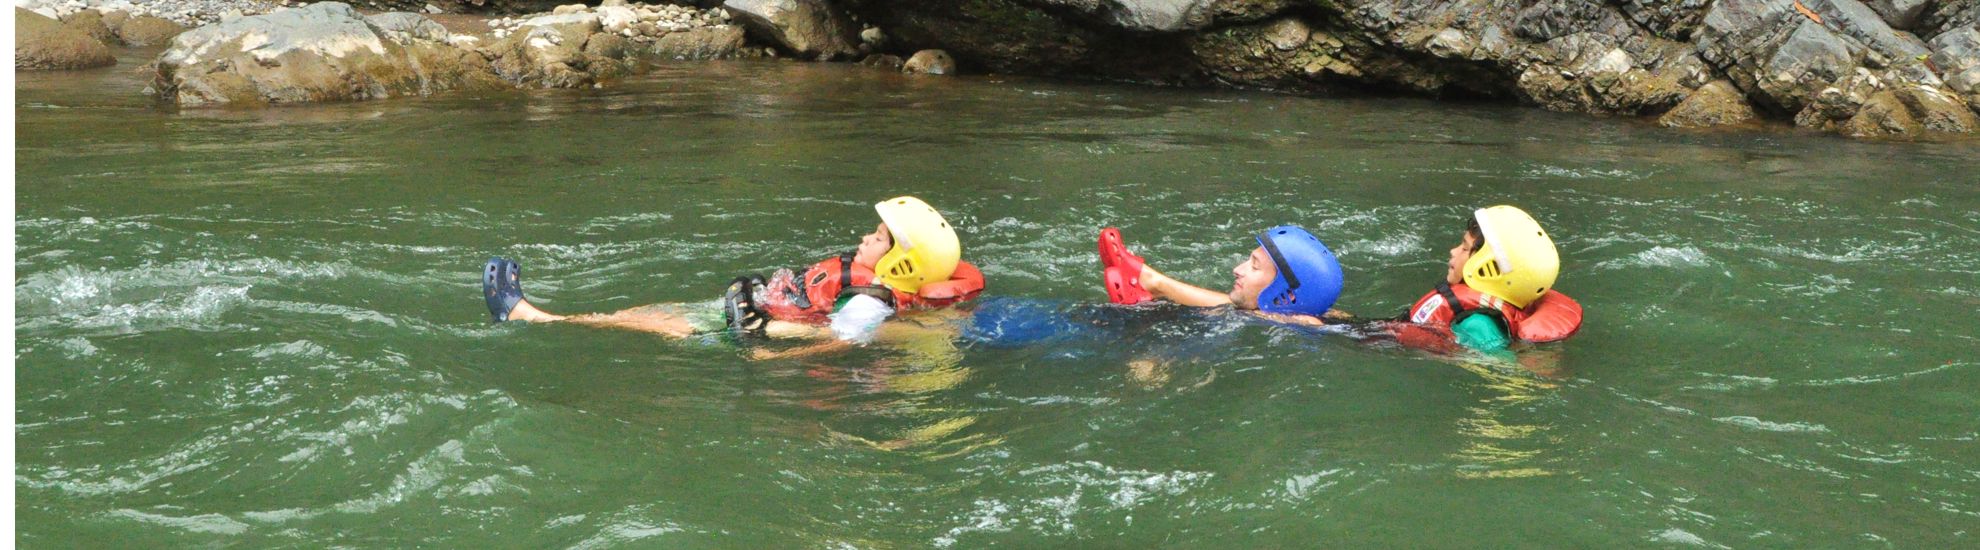 dad and sons chained by feet while floating down the river